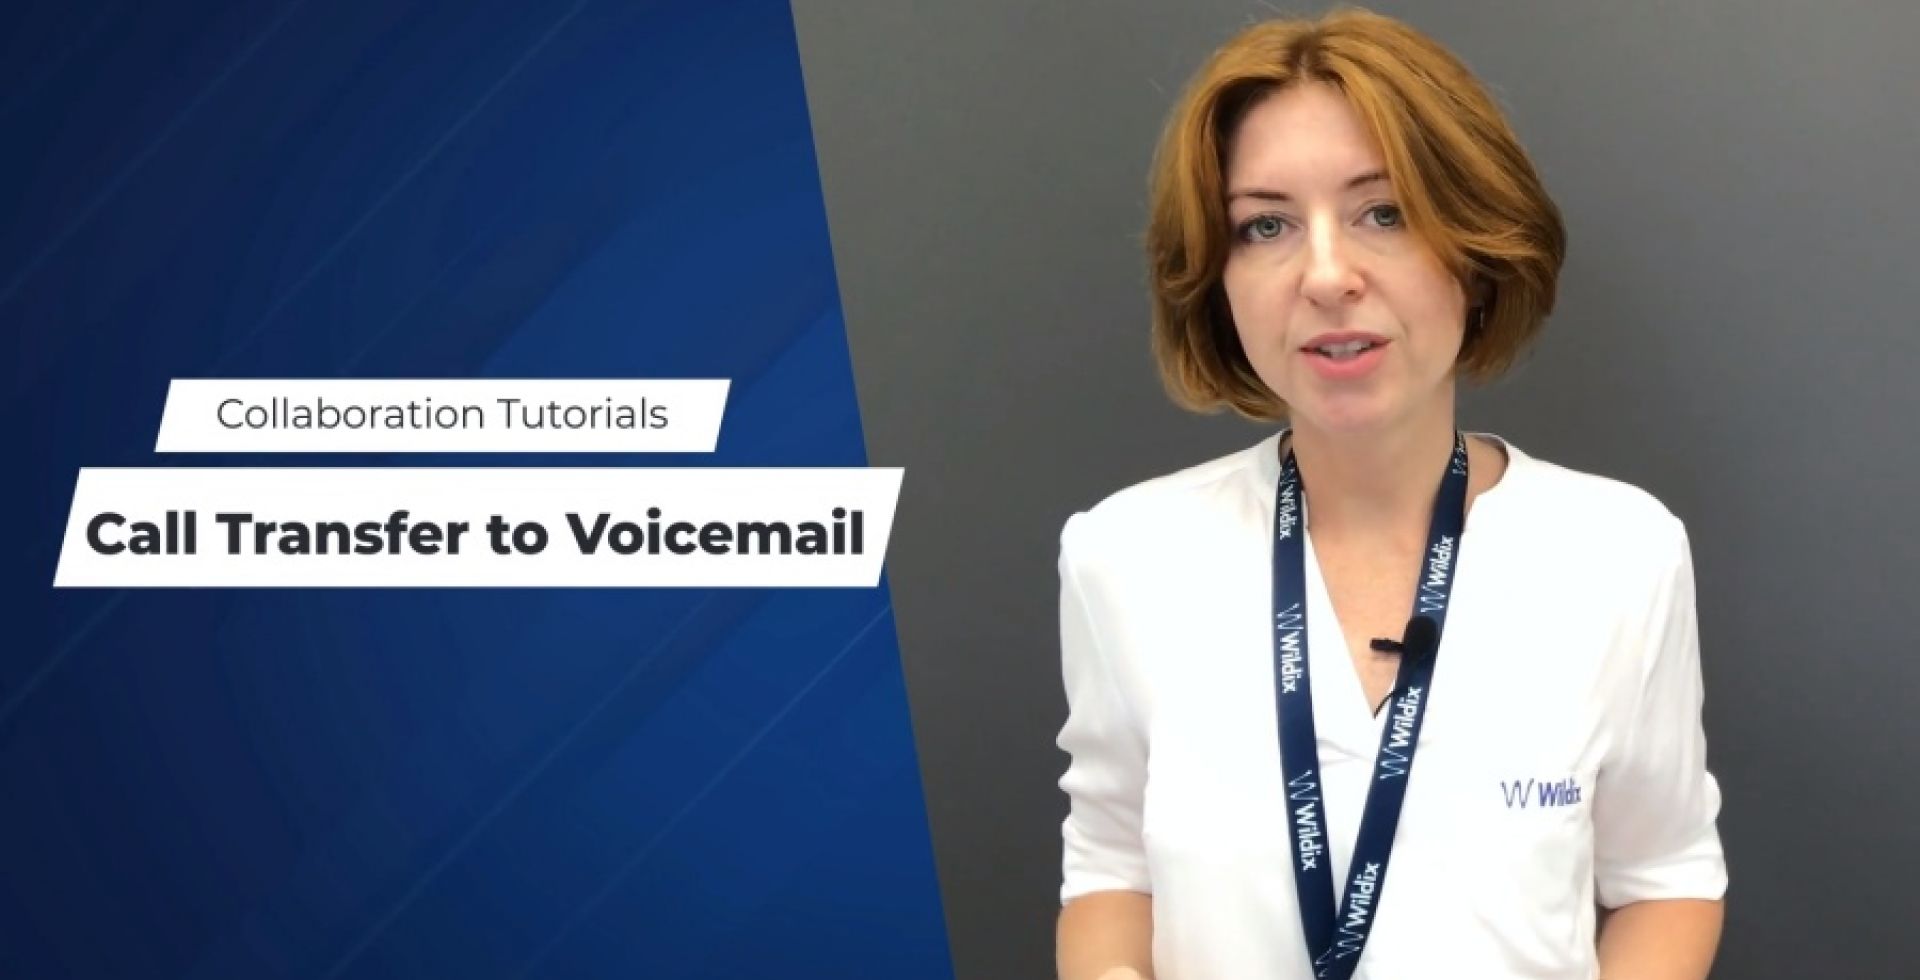 Call transfer to voicemail